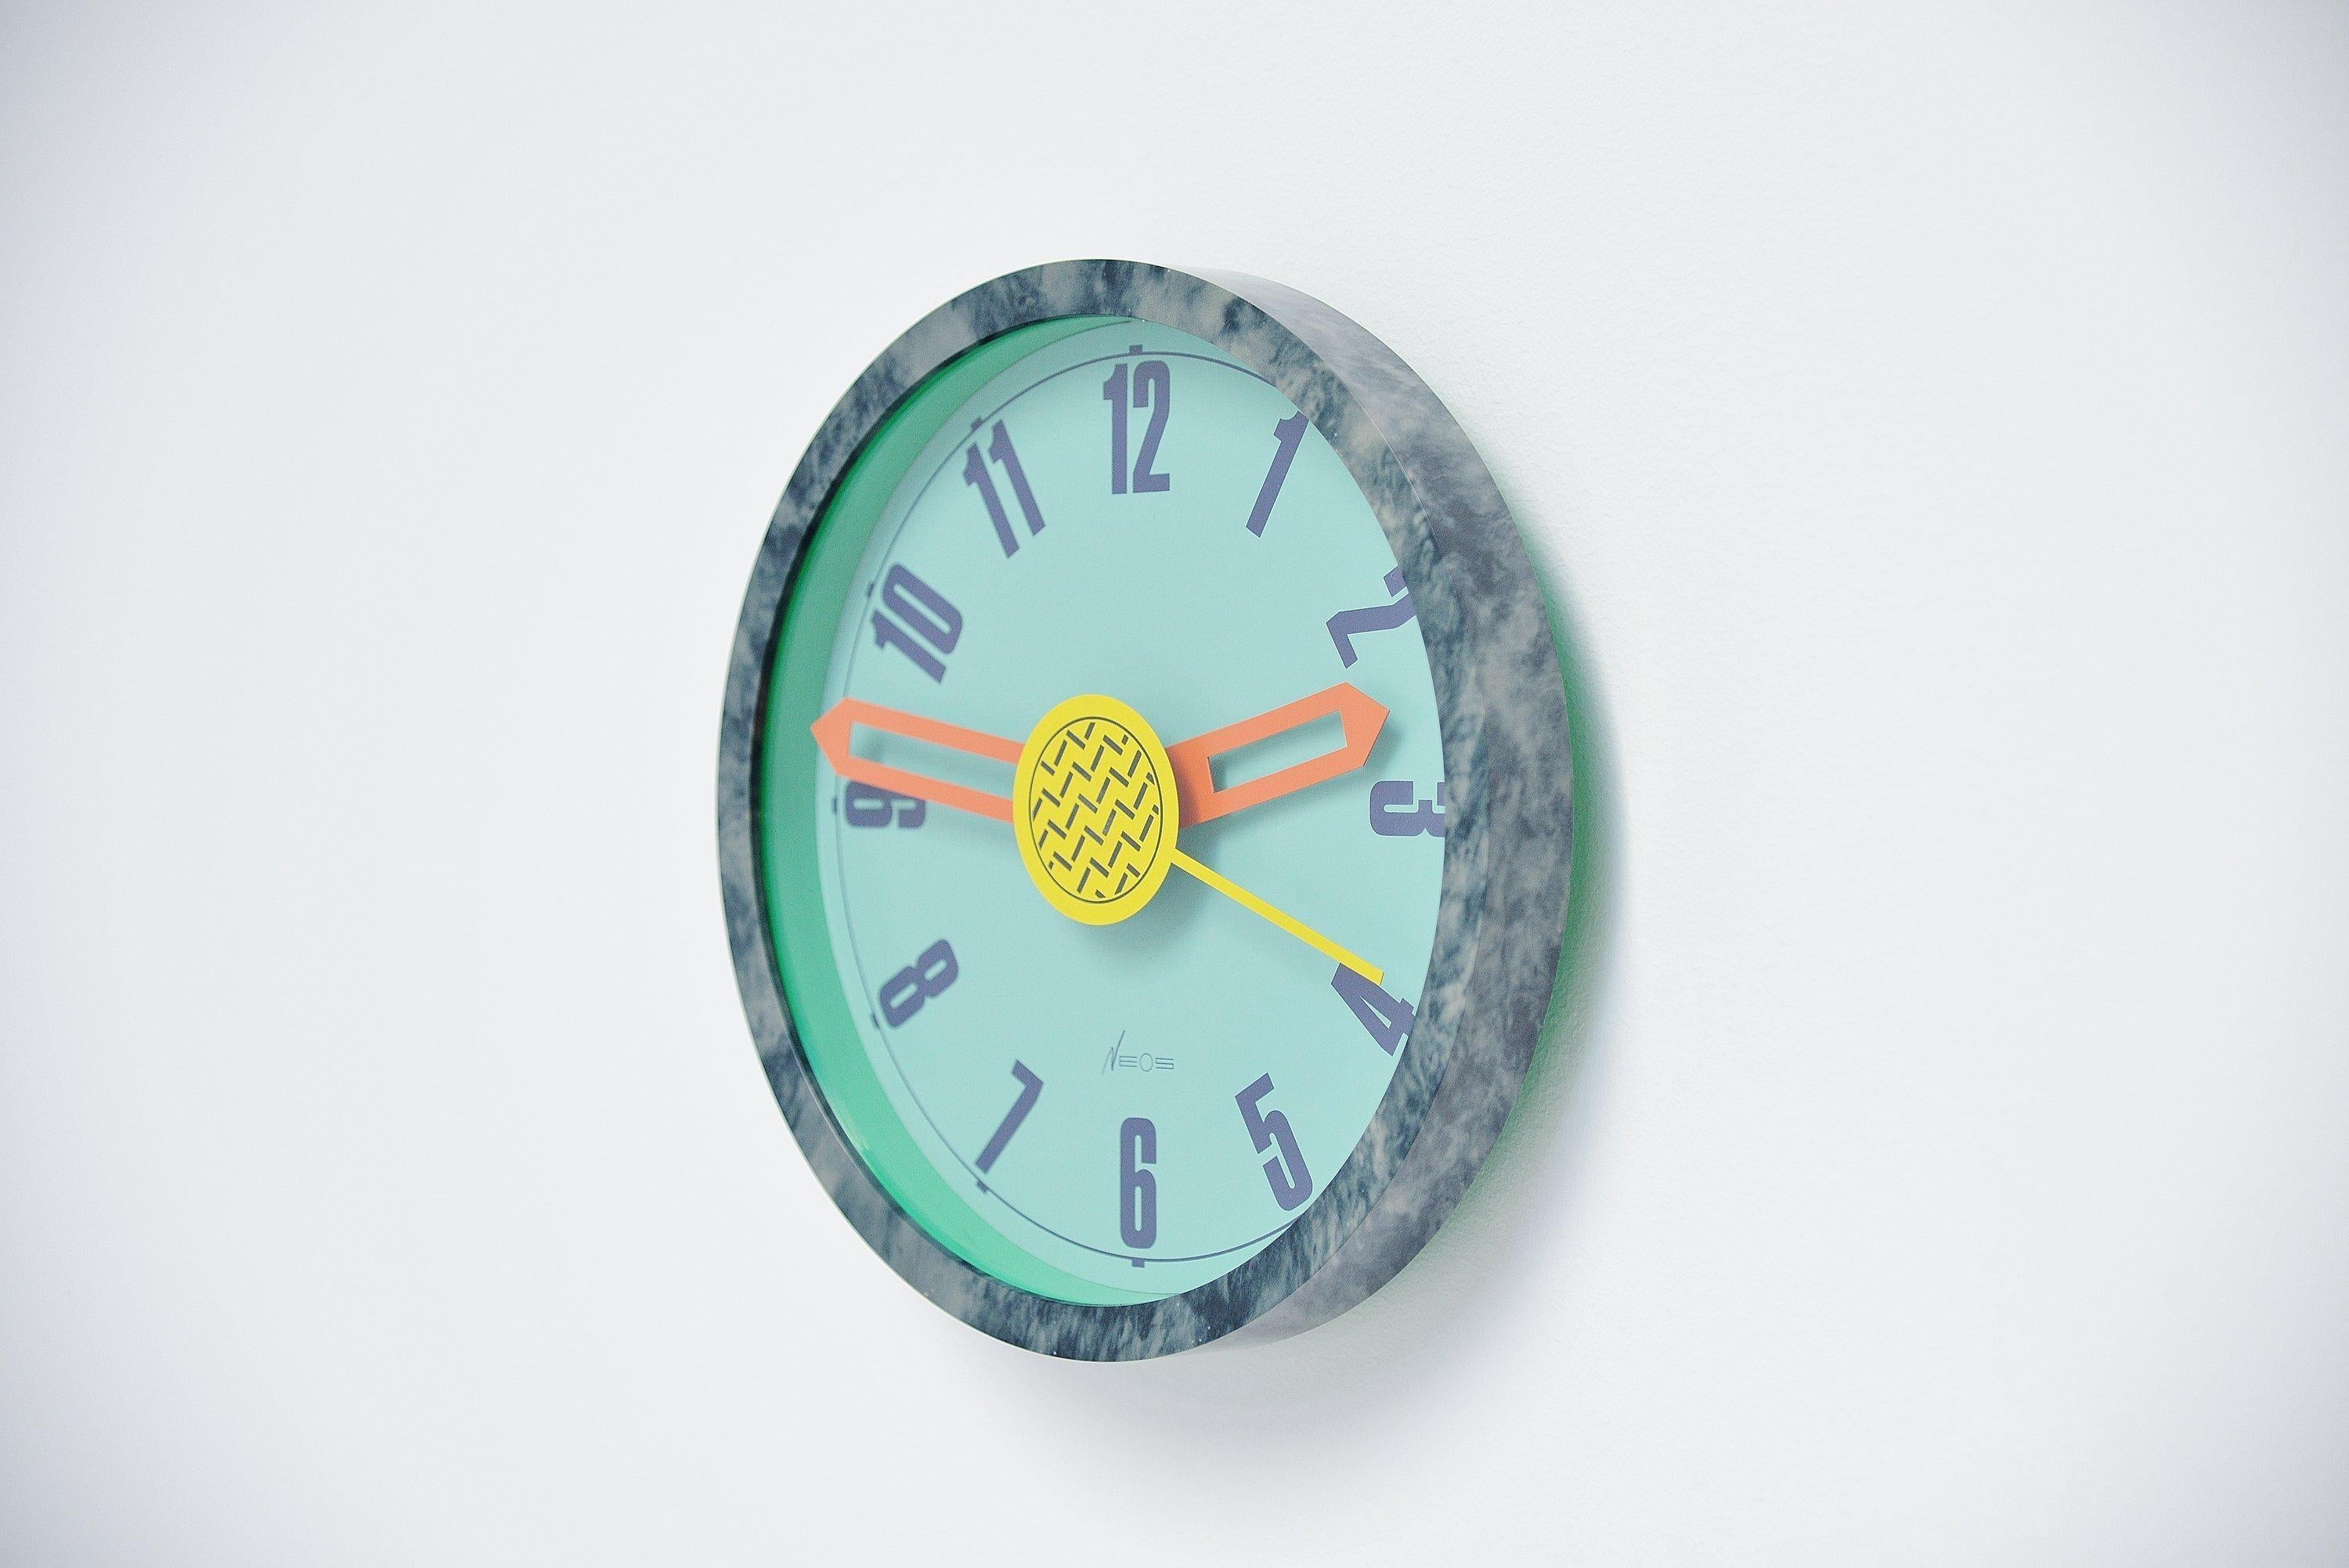 Memphis era wall clock designed by Nathalie du Pasquier and George Sowden and manufactured by Neos, Italy, 1988. The style and materials used for this clock represents the Memphis period at its best, the style and color usage are completely where